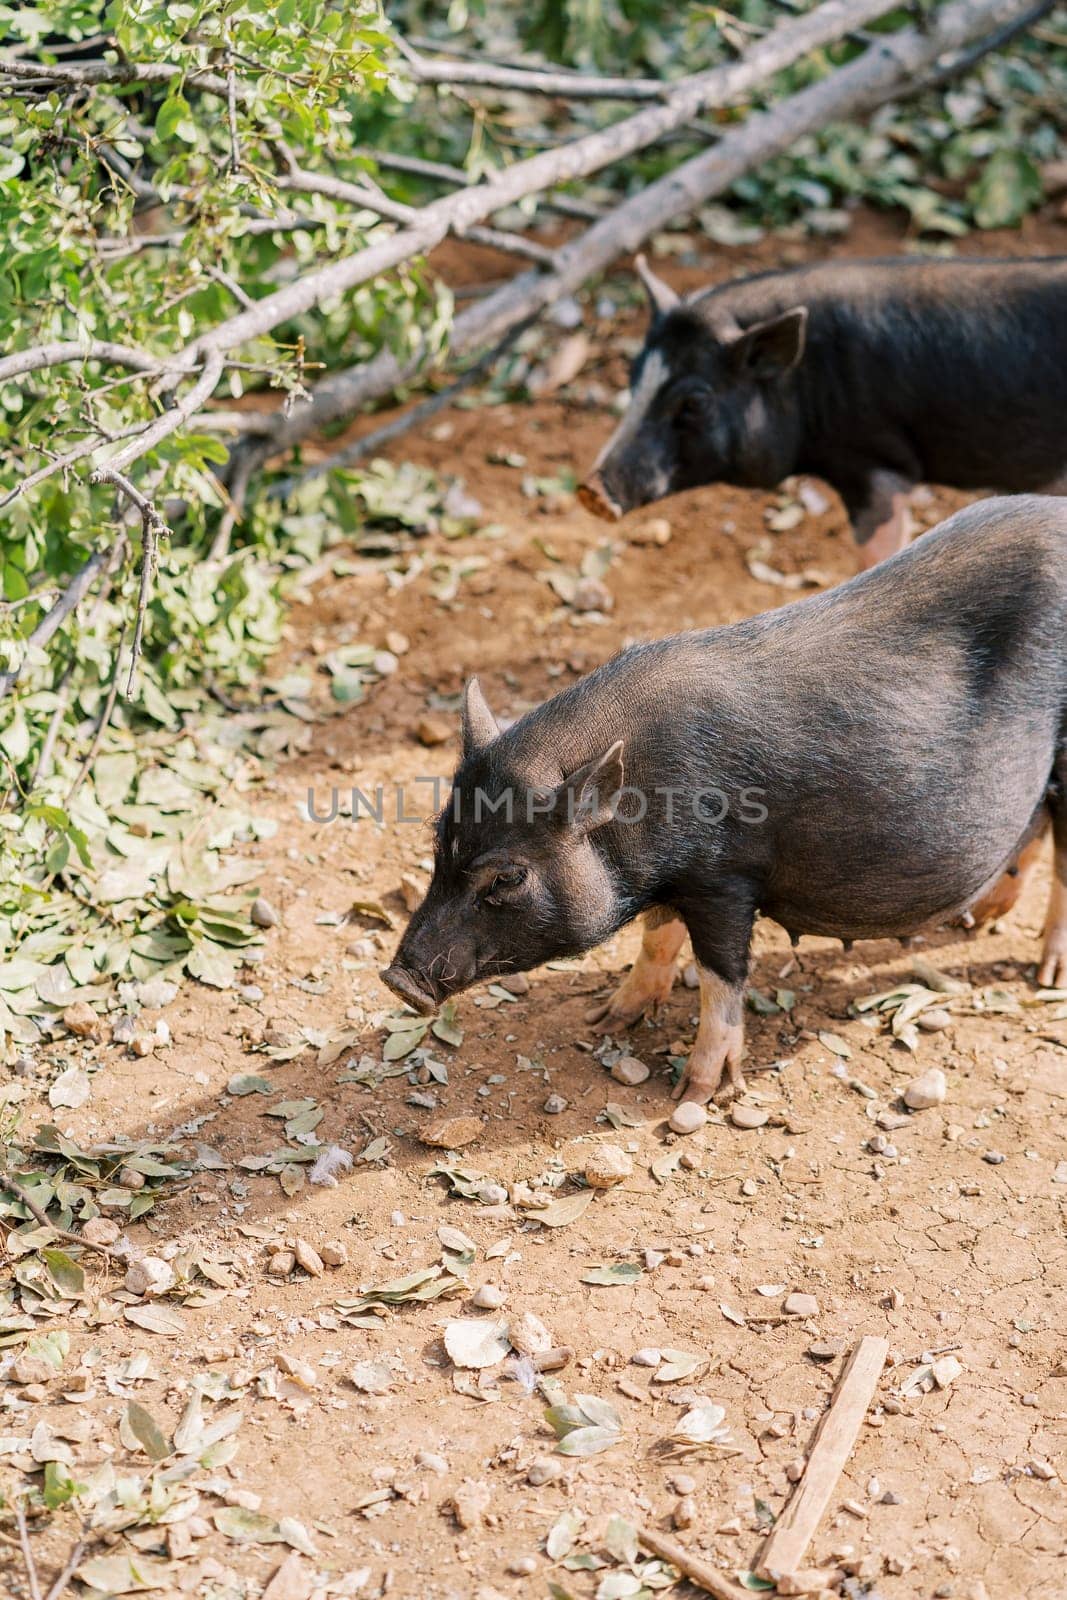 Black fluffy dwarf pigs stand near a fallen tree in the park by Nadtochiy